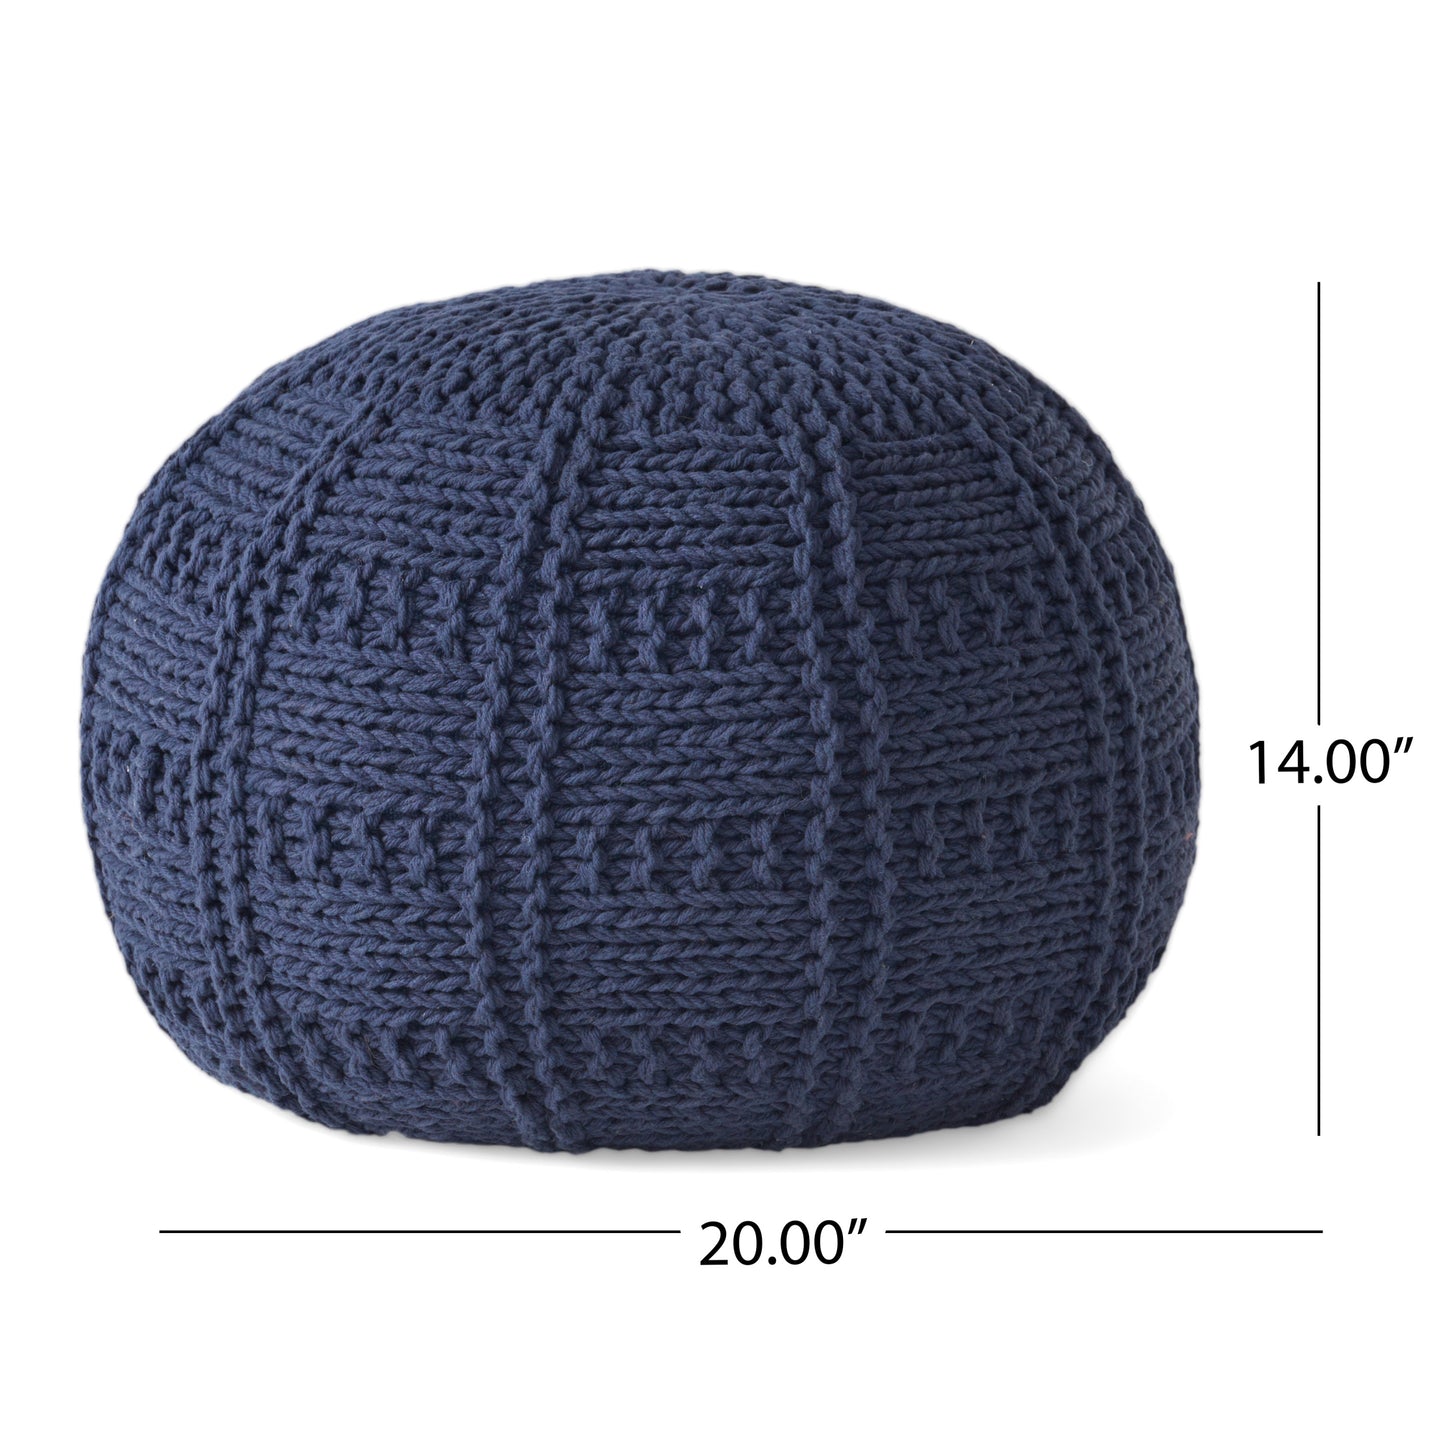 Yuny Handcrafted Modern Fabric Pouf, Navy